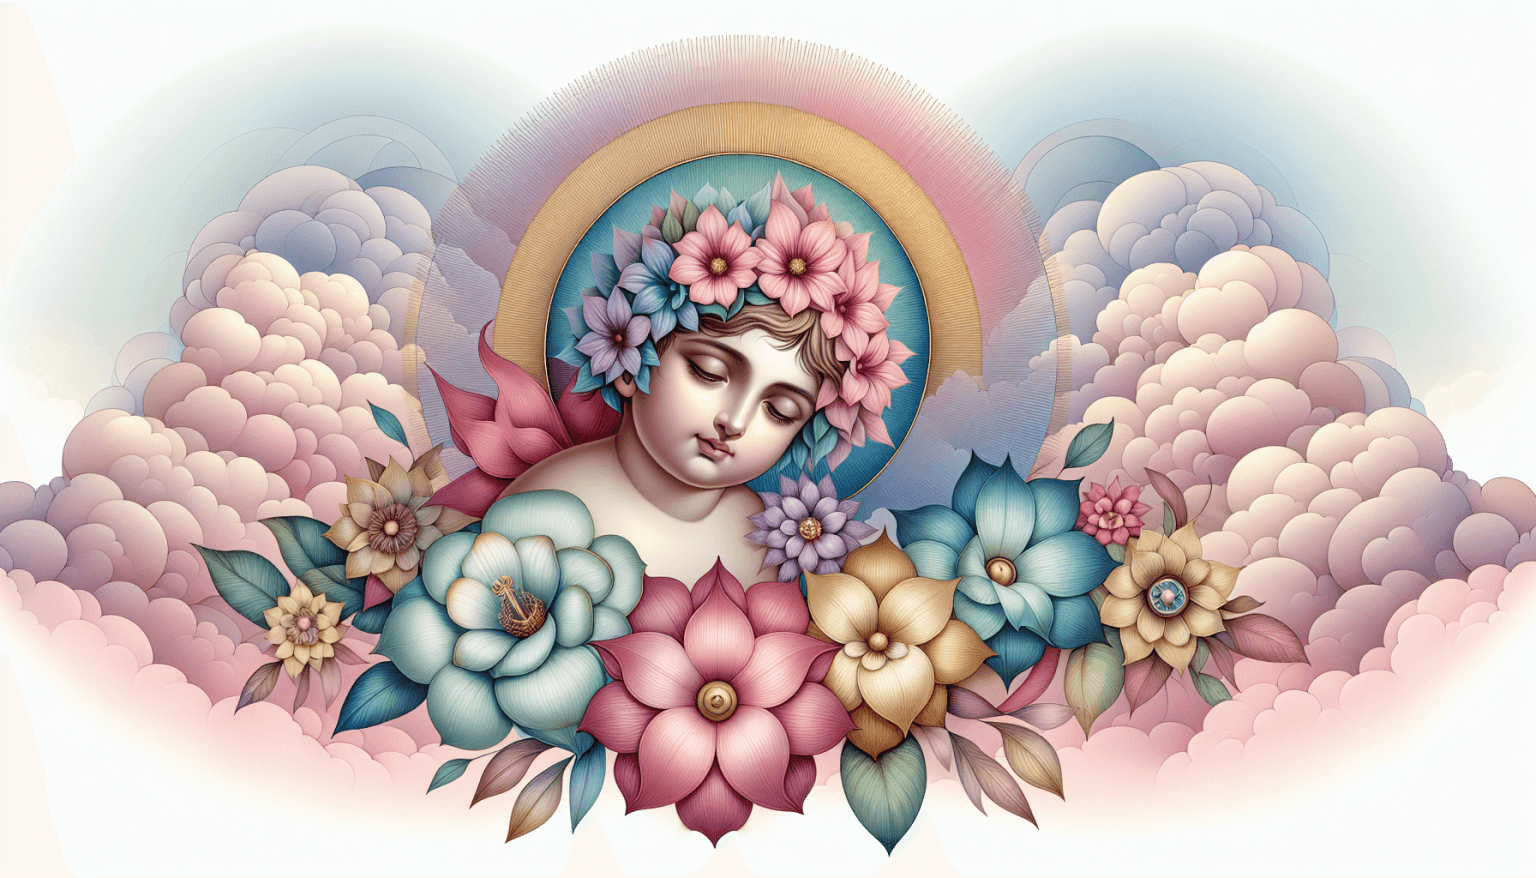 Artistic representation of the Divine Child Jesus surrounded by a halo of glowing flowers, with soft, pastel-colored clouds in the background, each bearing an inspirational short phrase in elegant scr